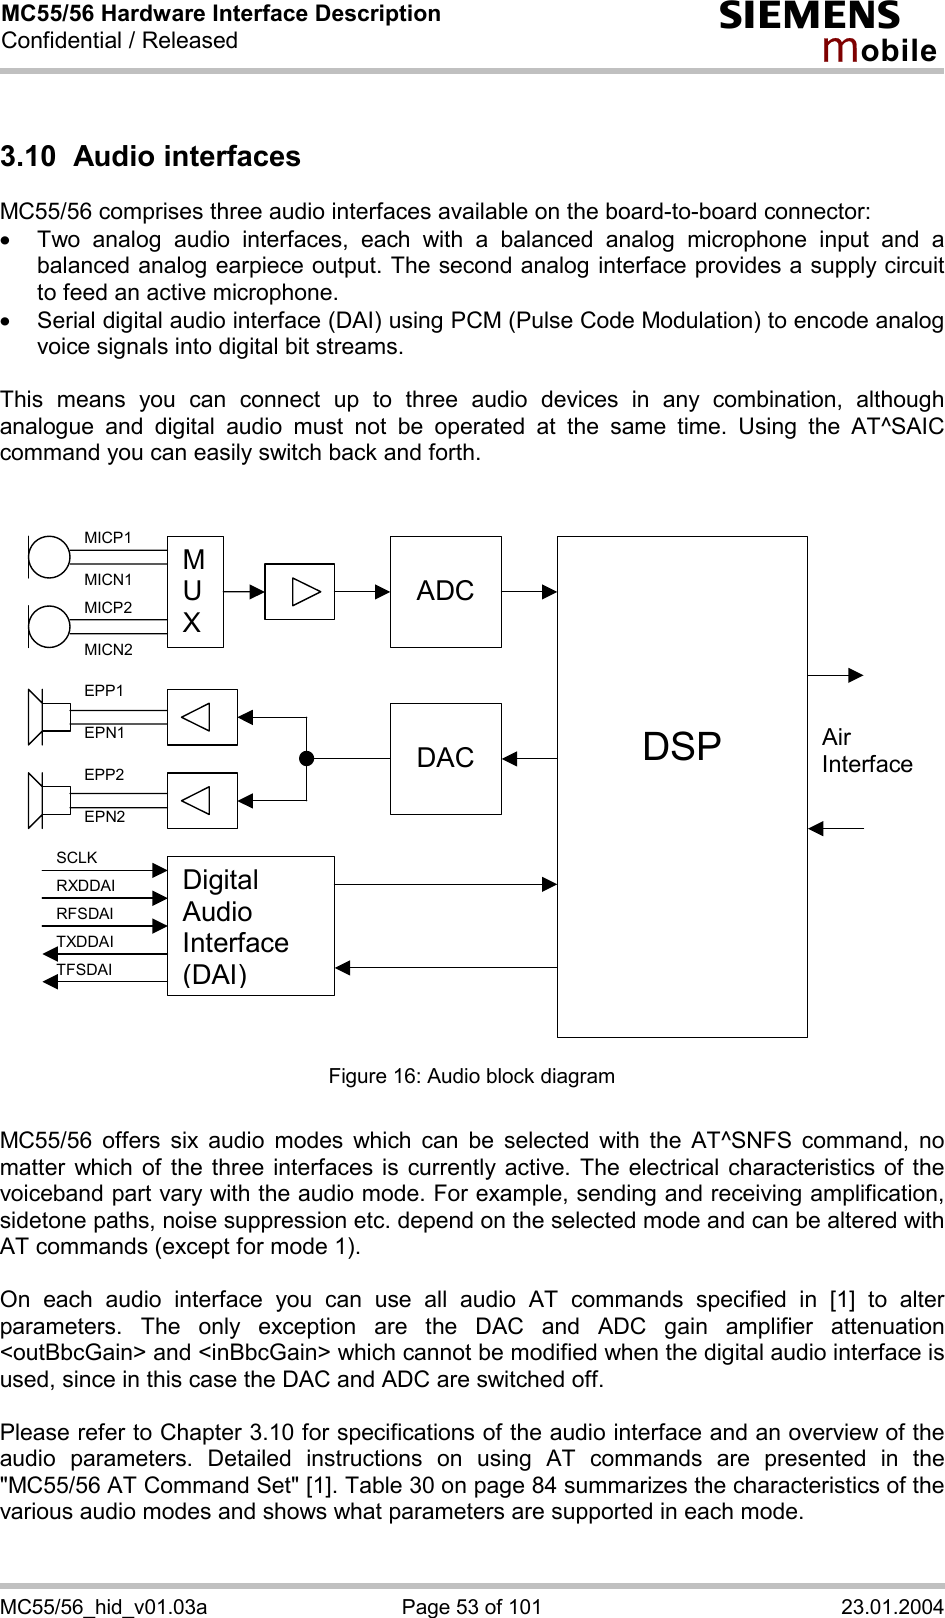 MC55/56 Hardware Interface Description Confidential / Released s mo b i l e MC55/56_hid_v01.03a  Page 53 of 101  23.01.2004 3.10 Audio interfaces MC55/56 comprises three audio interfaces available on the board-to-board connector:  ·  Two analog audio interfaces, each with a balanced analog microphone input and a balanced analog earpiece output. The second analog interface provides a supply circuit to feed an active microphone. ·  Serial digital audio interface (DAI) using PCM (Pulse Code Modulation) to encode analog voice signals into digital bit streams.  This means you can connect up to three audio devices in any combination, although analogue and digital audio must not be operated at the same time. Using the AT^SAIC command you can easily switch back and forth.    M U X  ADC     DSP  DACAir InterfaceDigital Audio Interface (DAI) MICP1 MICN1 MICP2 MICN2 EPP1 EPN1 EPP2 EPN2 SCLK RXDDAI TFSDAI RFSDAI TXDDAI  Figure 16: Audio block diagram  MC55/56 offers six audio modes which can be selected with the AT^SNFS command, no matter which of the three interfaces is currently active. The electrical characteristics of the voiceband part vary with the audio mode. For example, sending and receiving amplification, sidetone paths, noise suppression etc. depend on the selected mode and can be altered with AT commands (except for mode 1).  On each audio interface you can use all audio AT commands specified in [1] to alter parameters. The only exception are the DAC and ADC gain amplifier attenuation &lt;outBbcGain&gt; and &lt;inBbcGain&gt; which cannot be modified when the digital audio interface is used, since in this case the DAC and ADC are switched off.  Please refer to Chapter 3.10 for specifications of the audio interface and an overview of the audio parameters. Detailed instructions on using AT commands are presented in the &quot;MC55/56 AT Command Set&quot; [1]. Table 30 on page 84 summarizes the characteristics of the various audio modes and shows what parameters are supported in each mode.  